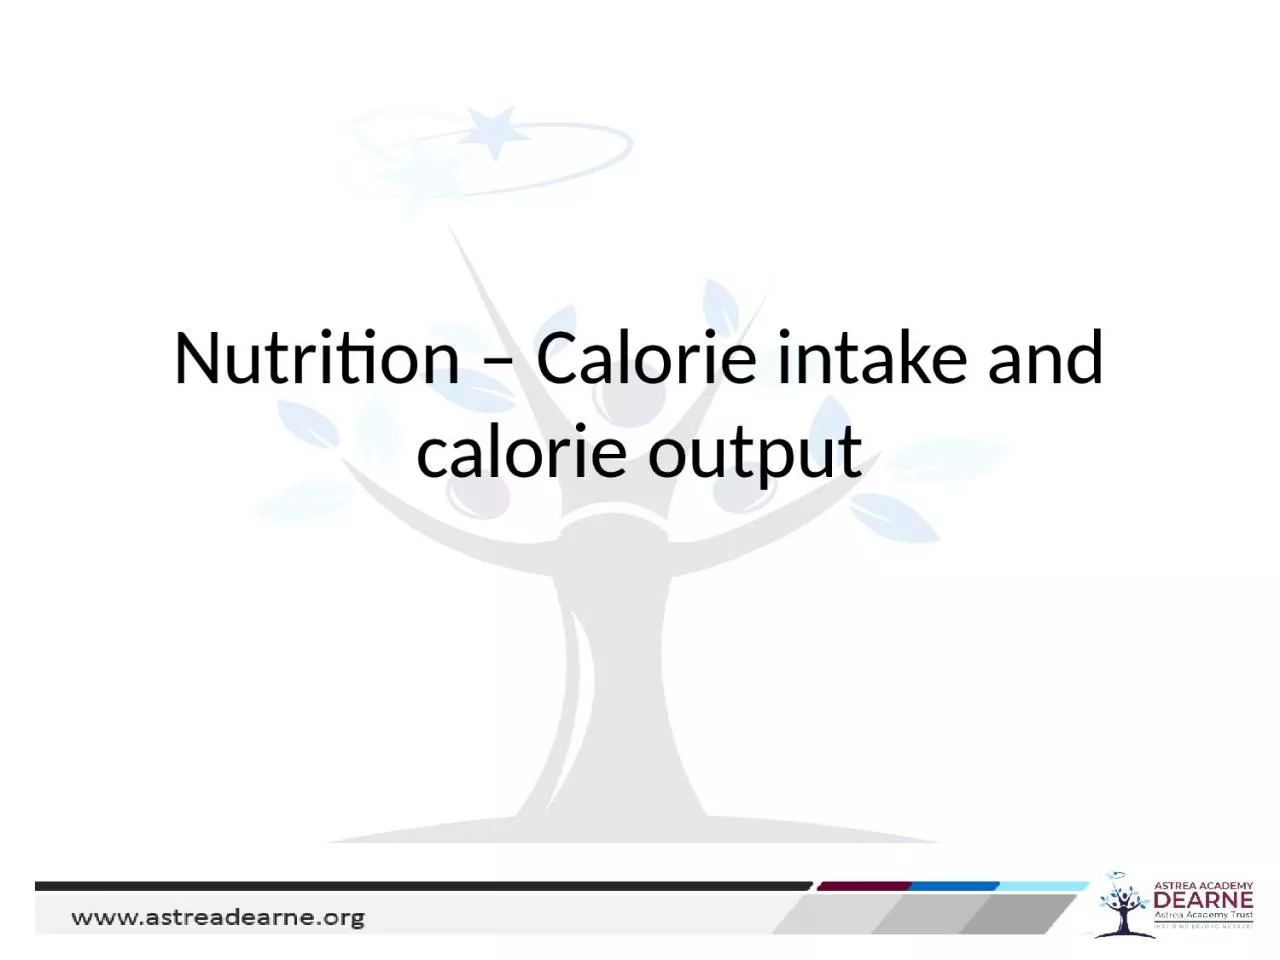 Nutrition – Calorie intake and calorie output